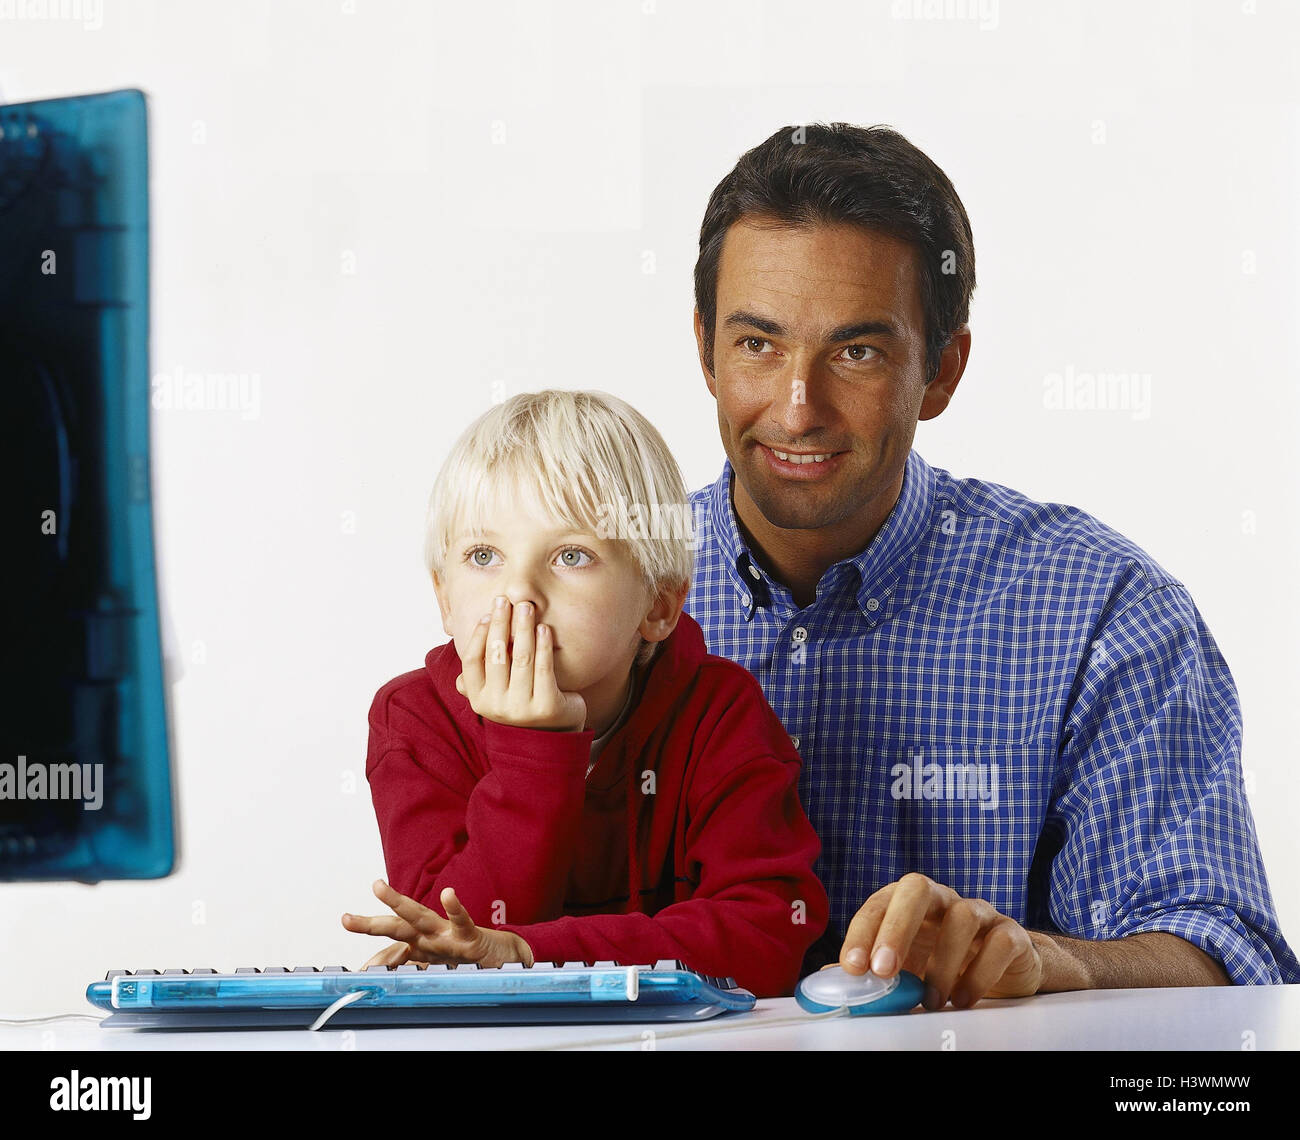 Father, son, computer, gesture, detail, Families, man, child, boy, concentration, voltage, enthusiasm, attention, learn, education, play, Stock Photo